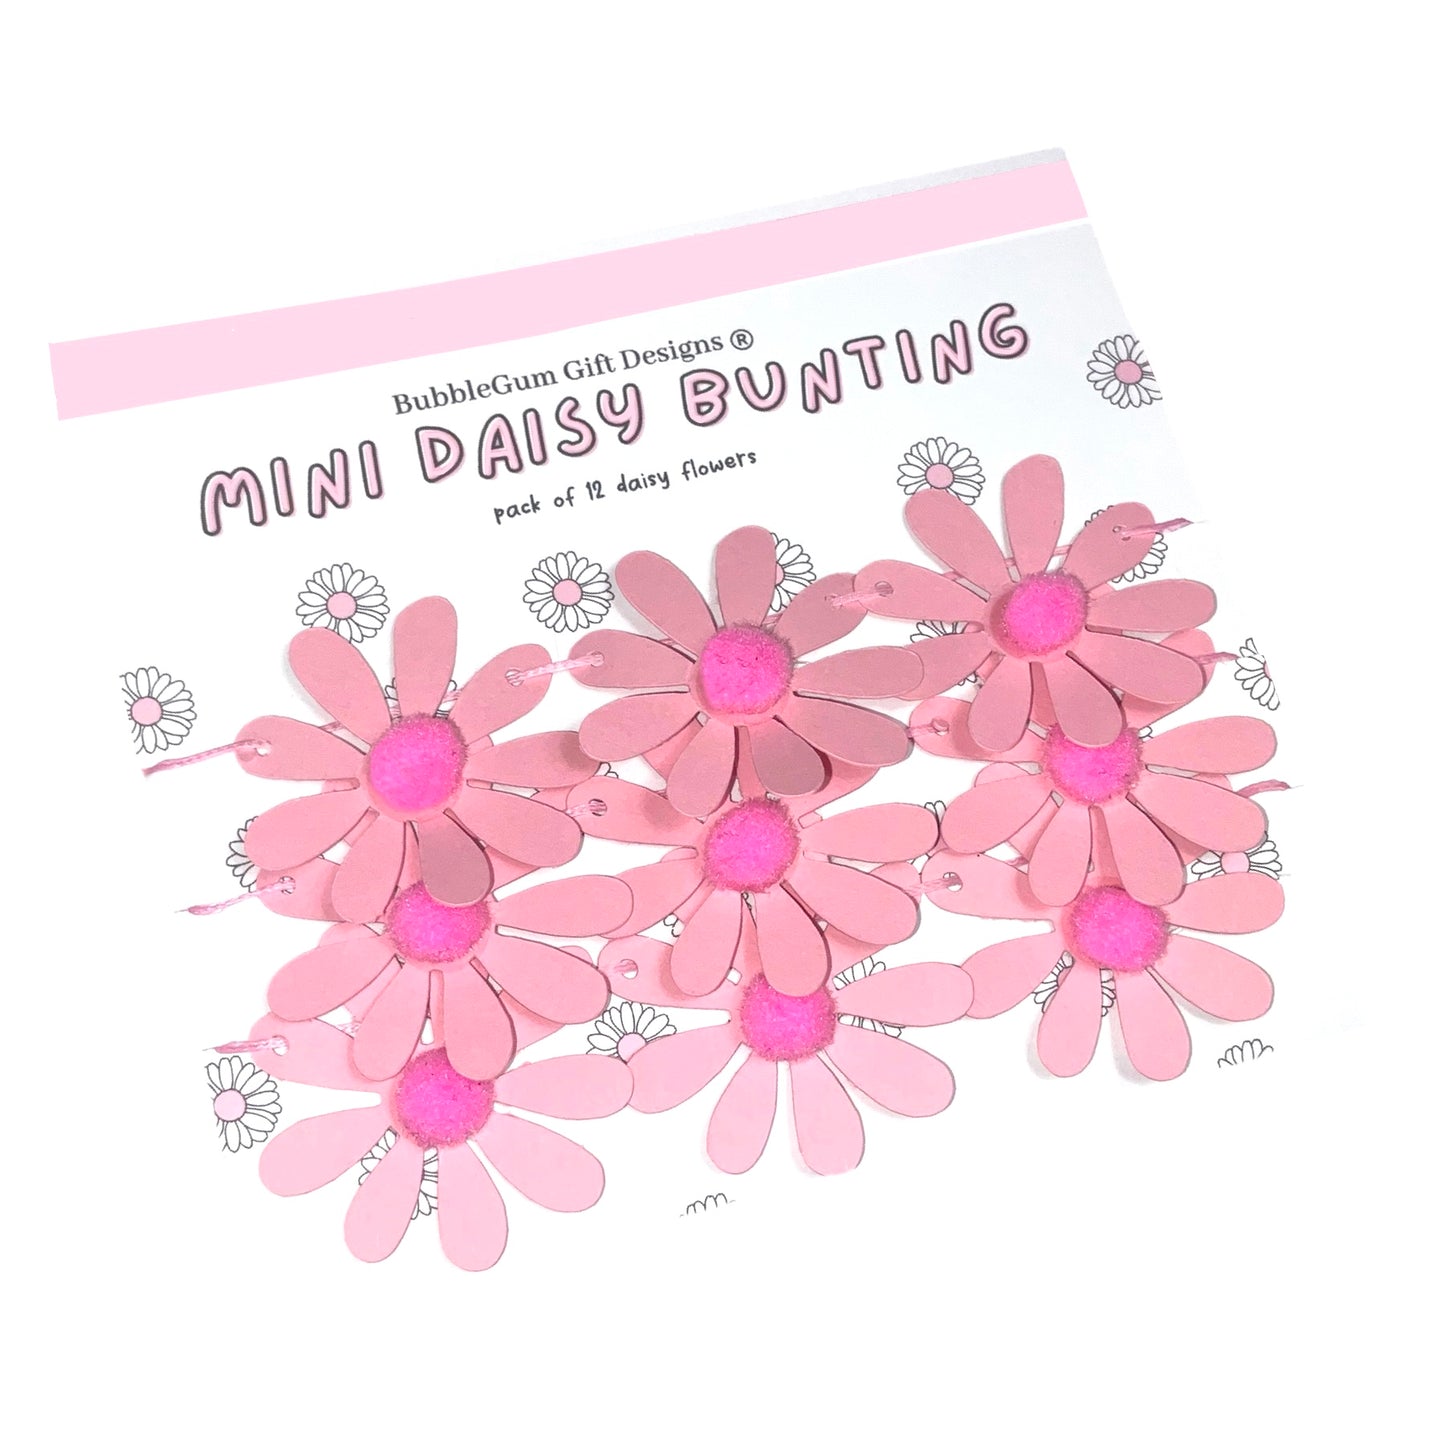 Daisy flower mini bunting with pink petals and pom pom floral daisy decoration pink daisies